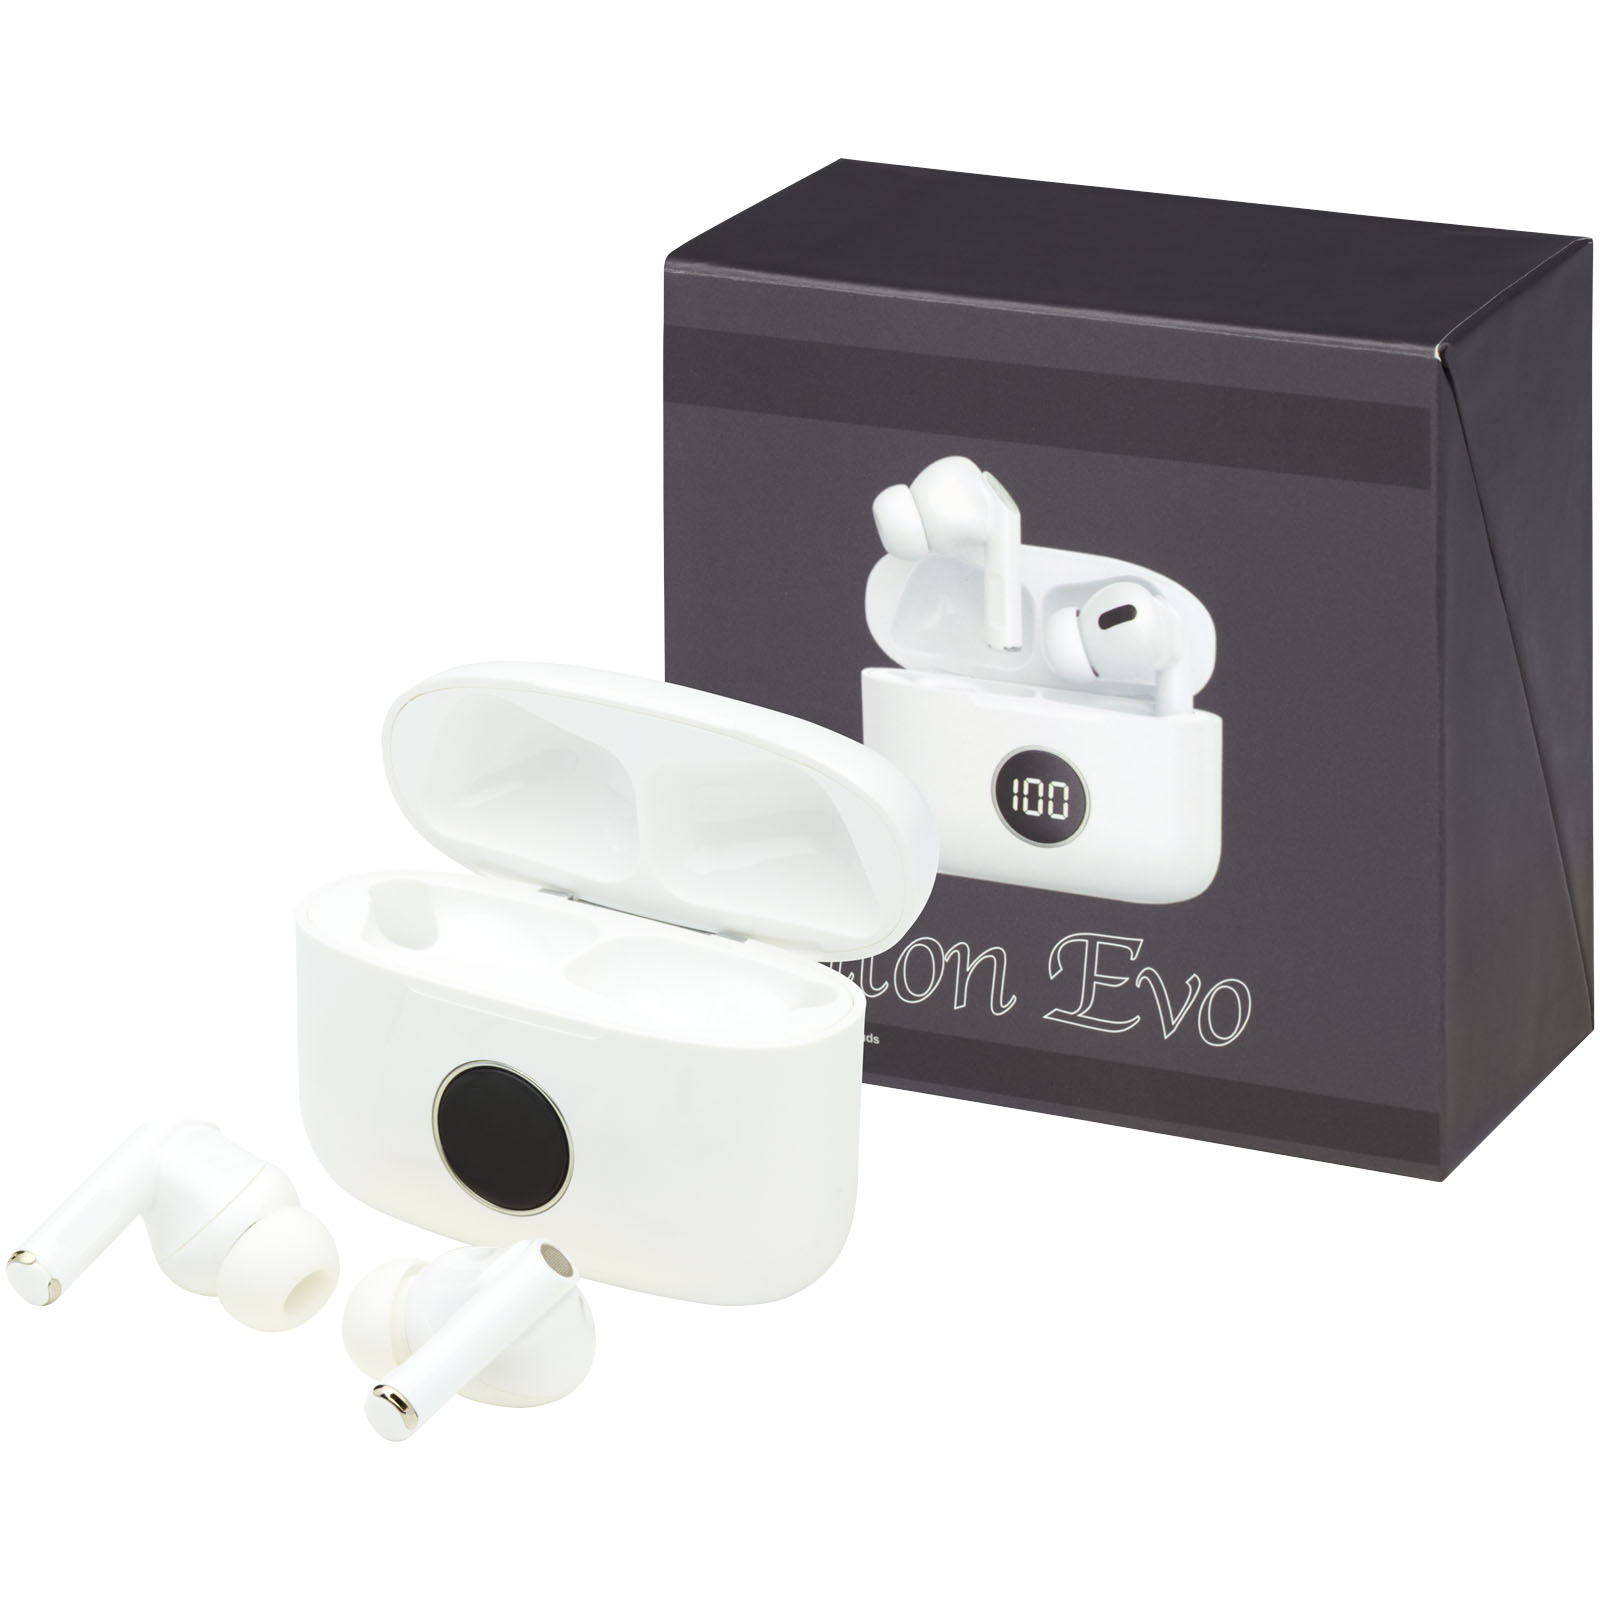 Advertising Earbuds - Anton Evo ANC earbuds - 4